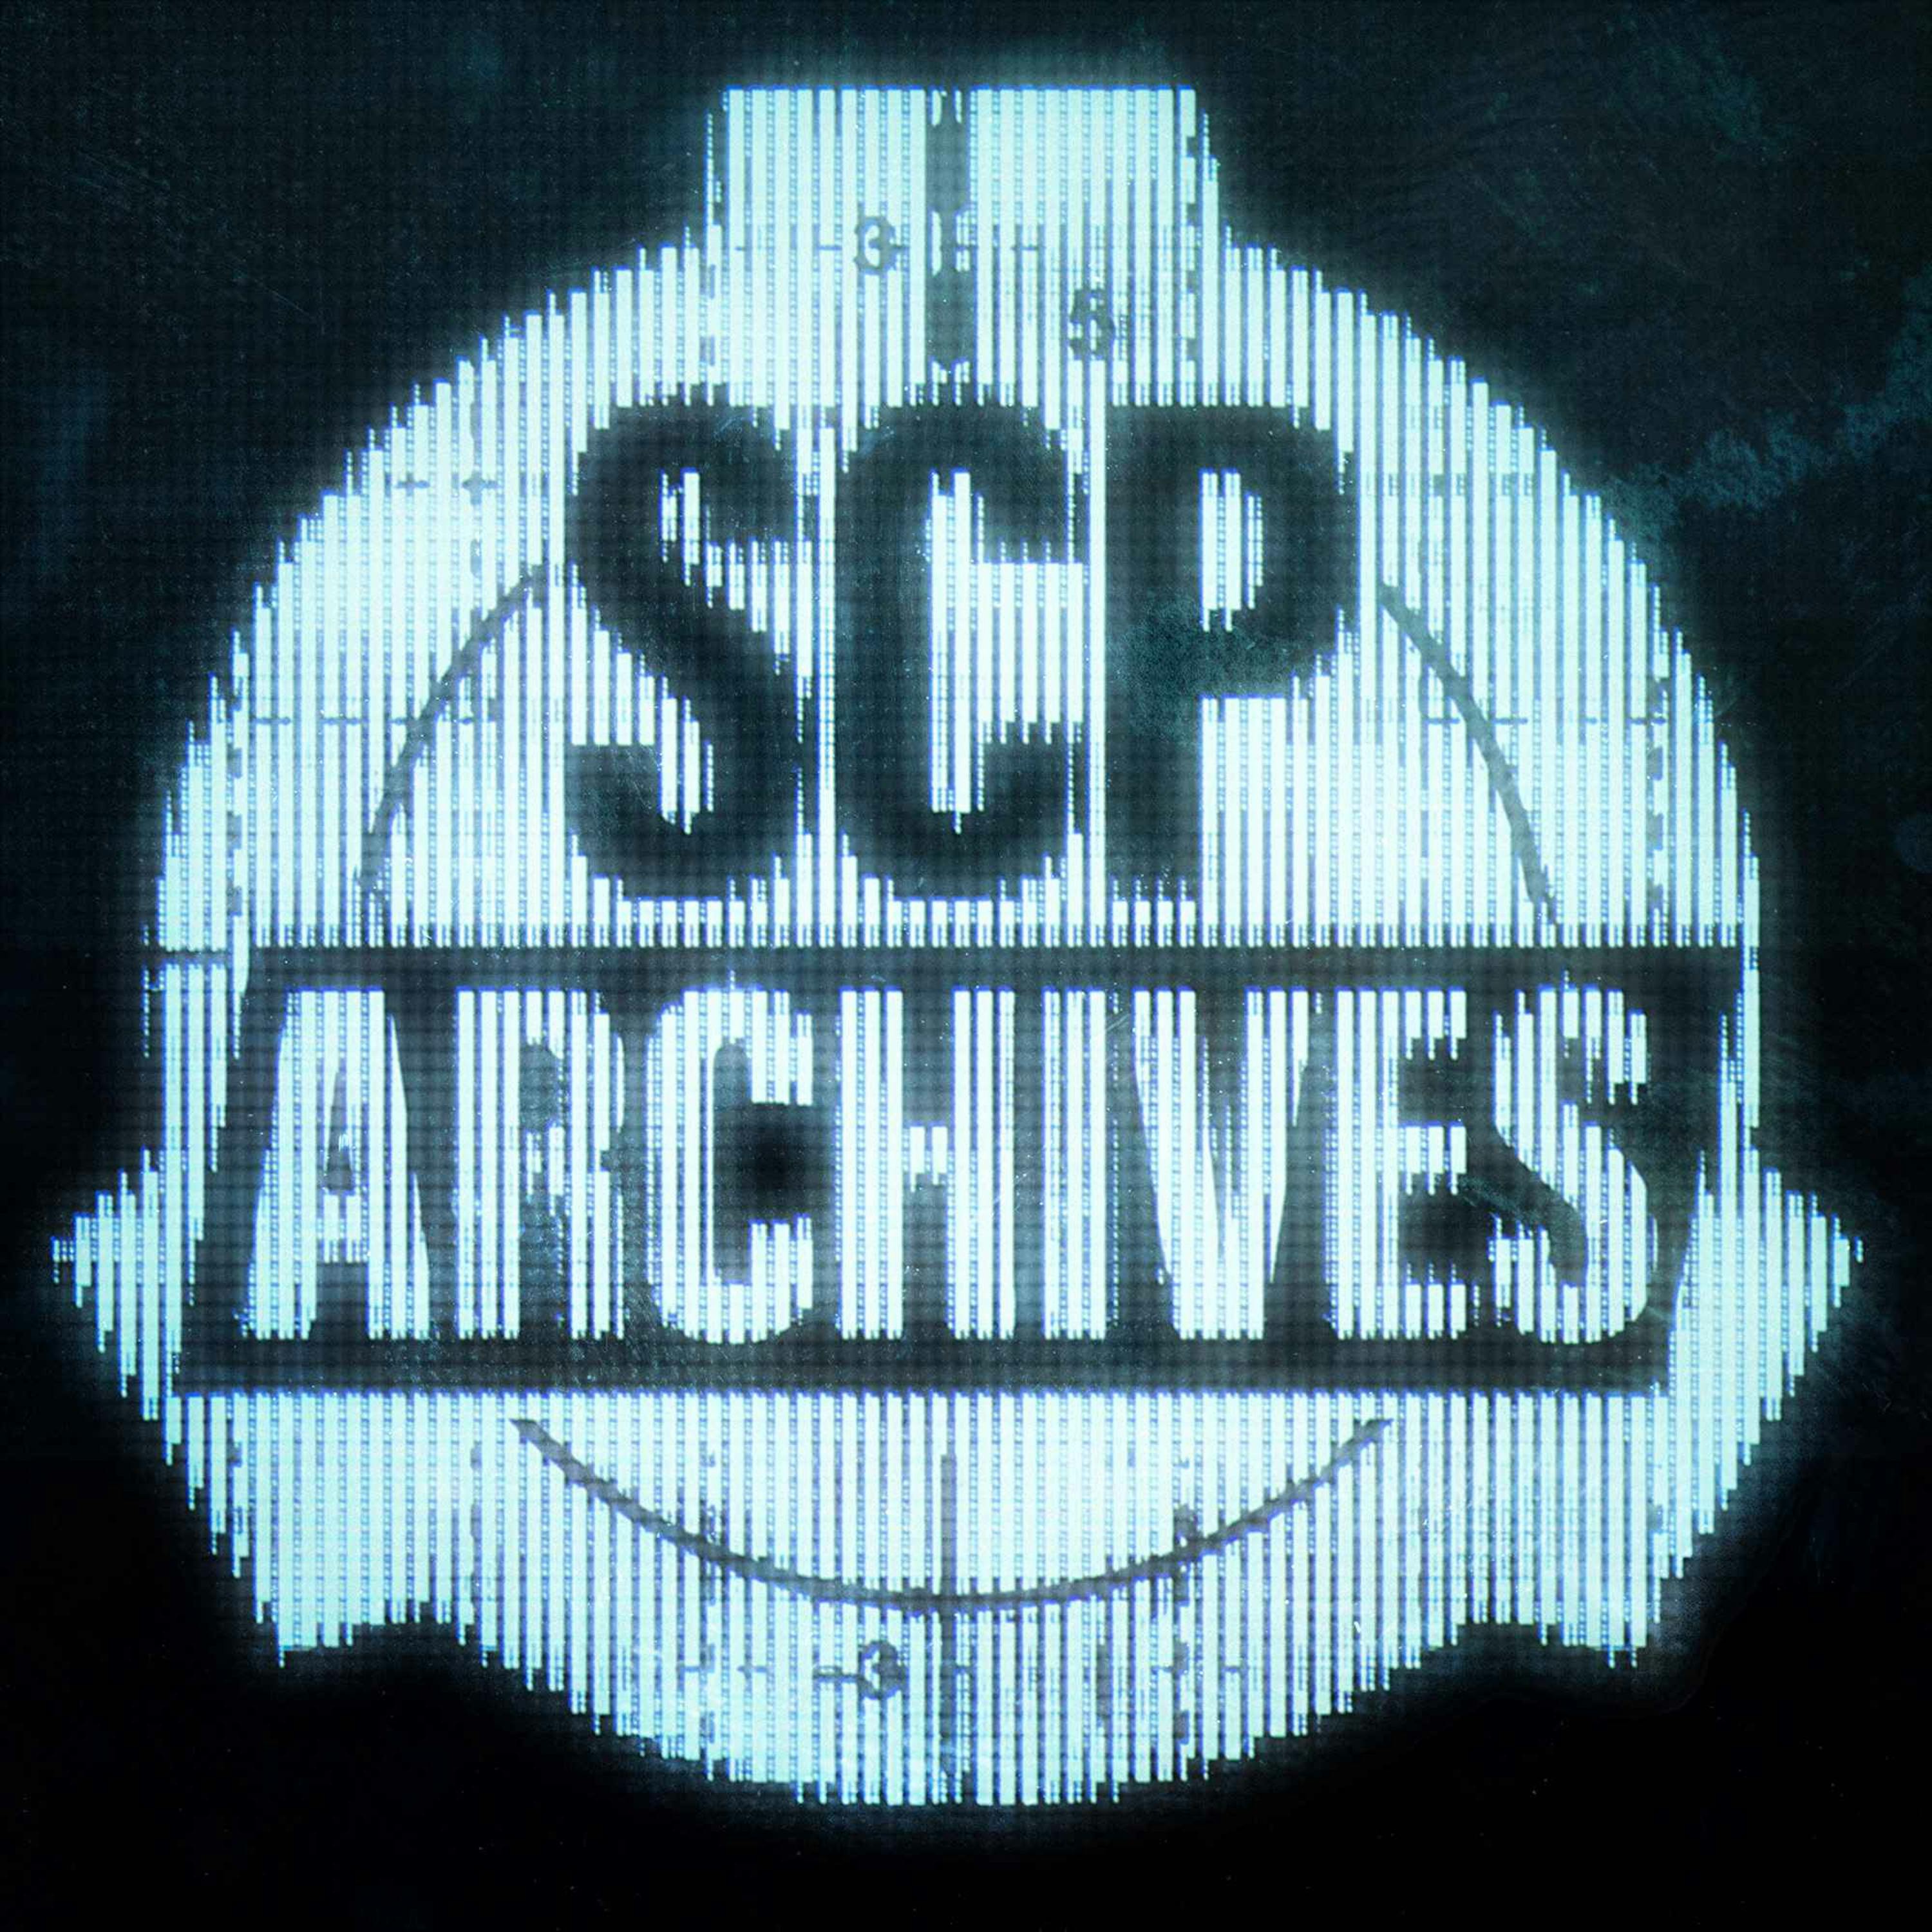 Stream episode SCP - 001 - Sheaf Of Papers by SCP Audio Logs podcast